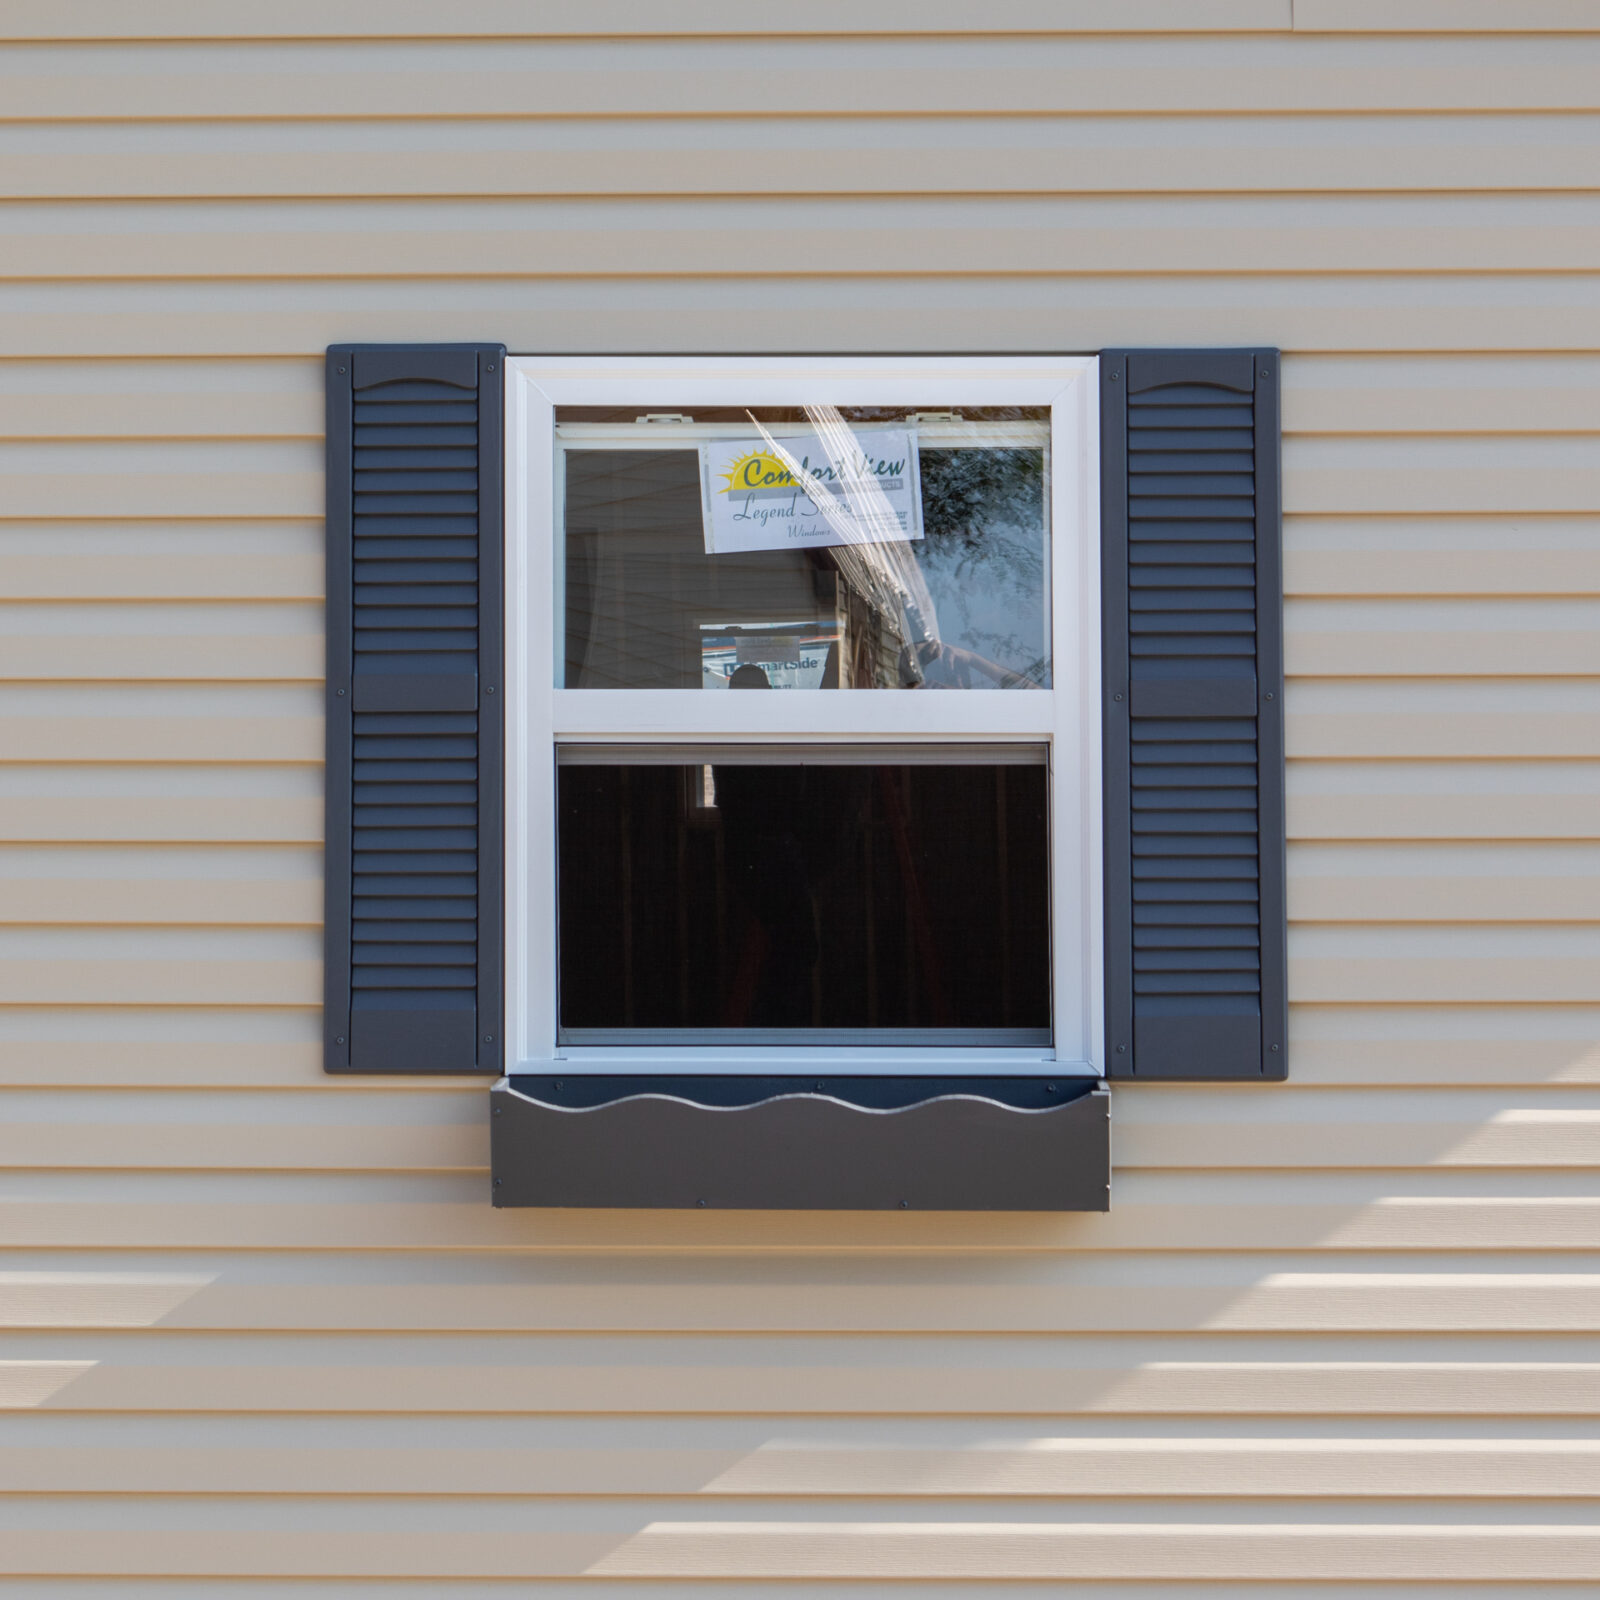 exterior of window shutters for vinyl sheds for sale in KY and TN